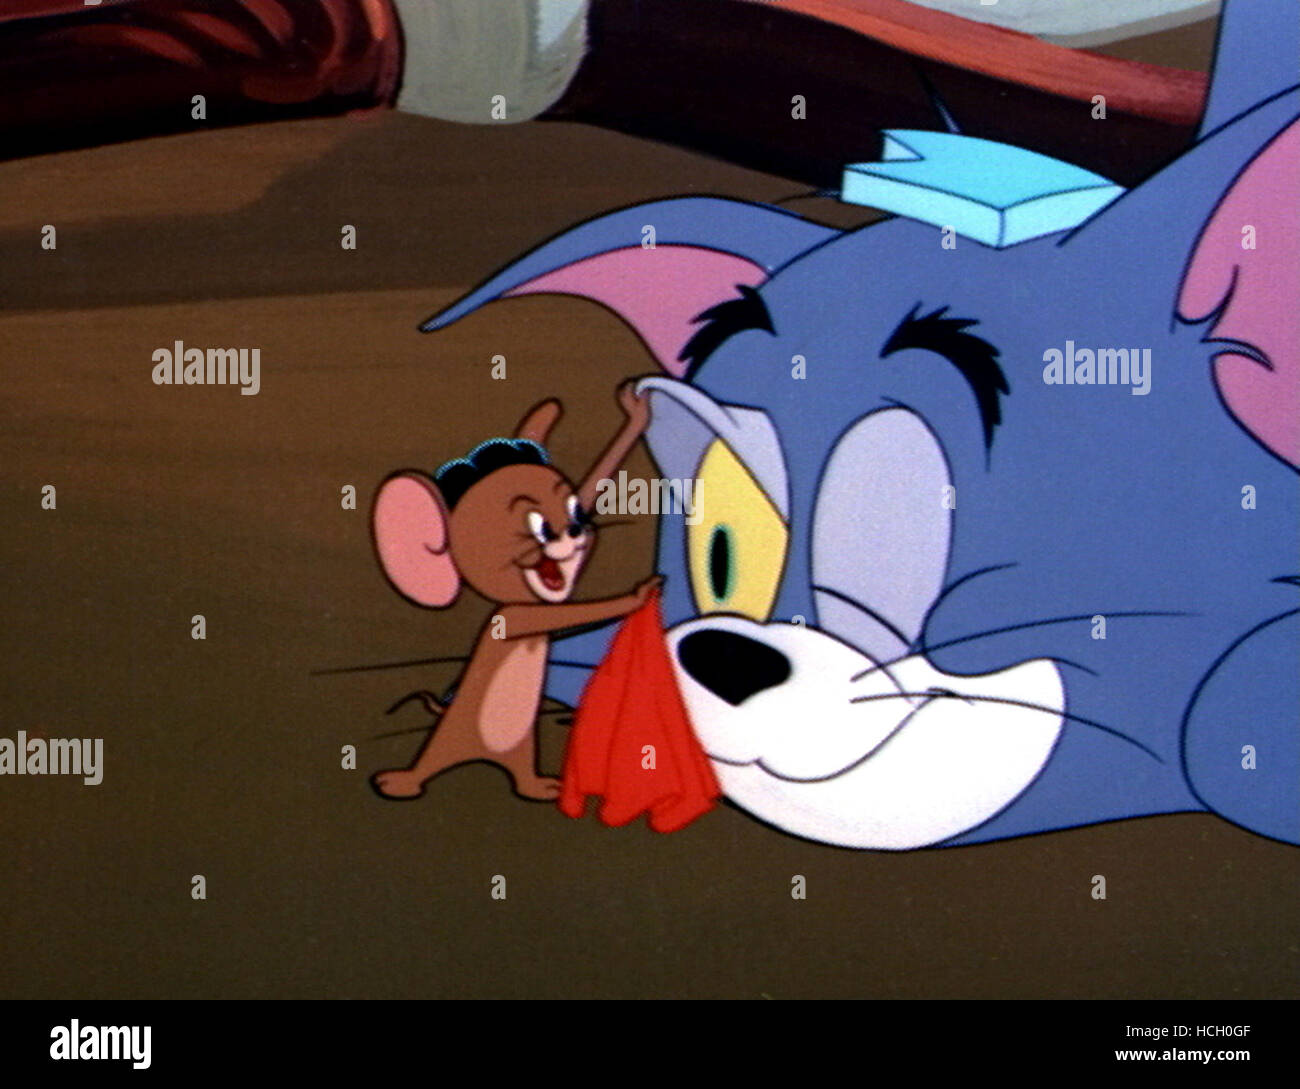 MUCHO MOUSE, Tom & Jerry (Jerry Mouse, Tom Cat), 1957 Stock Photo - Alamy